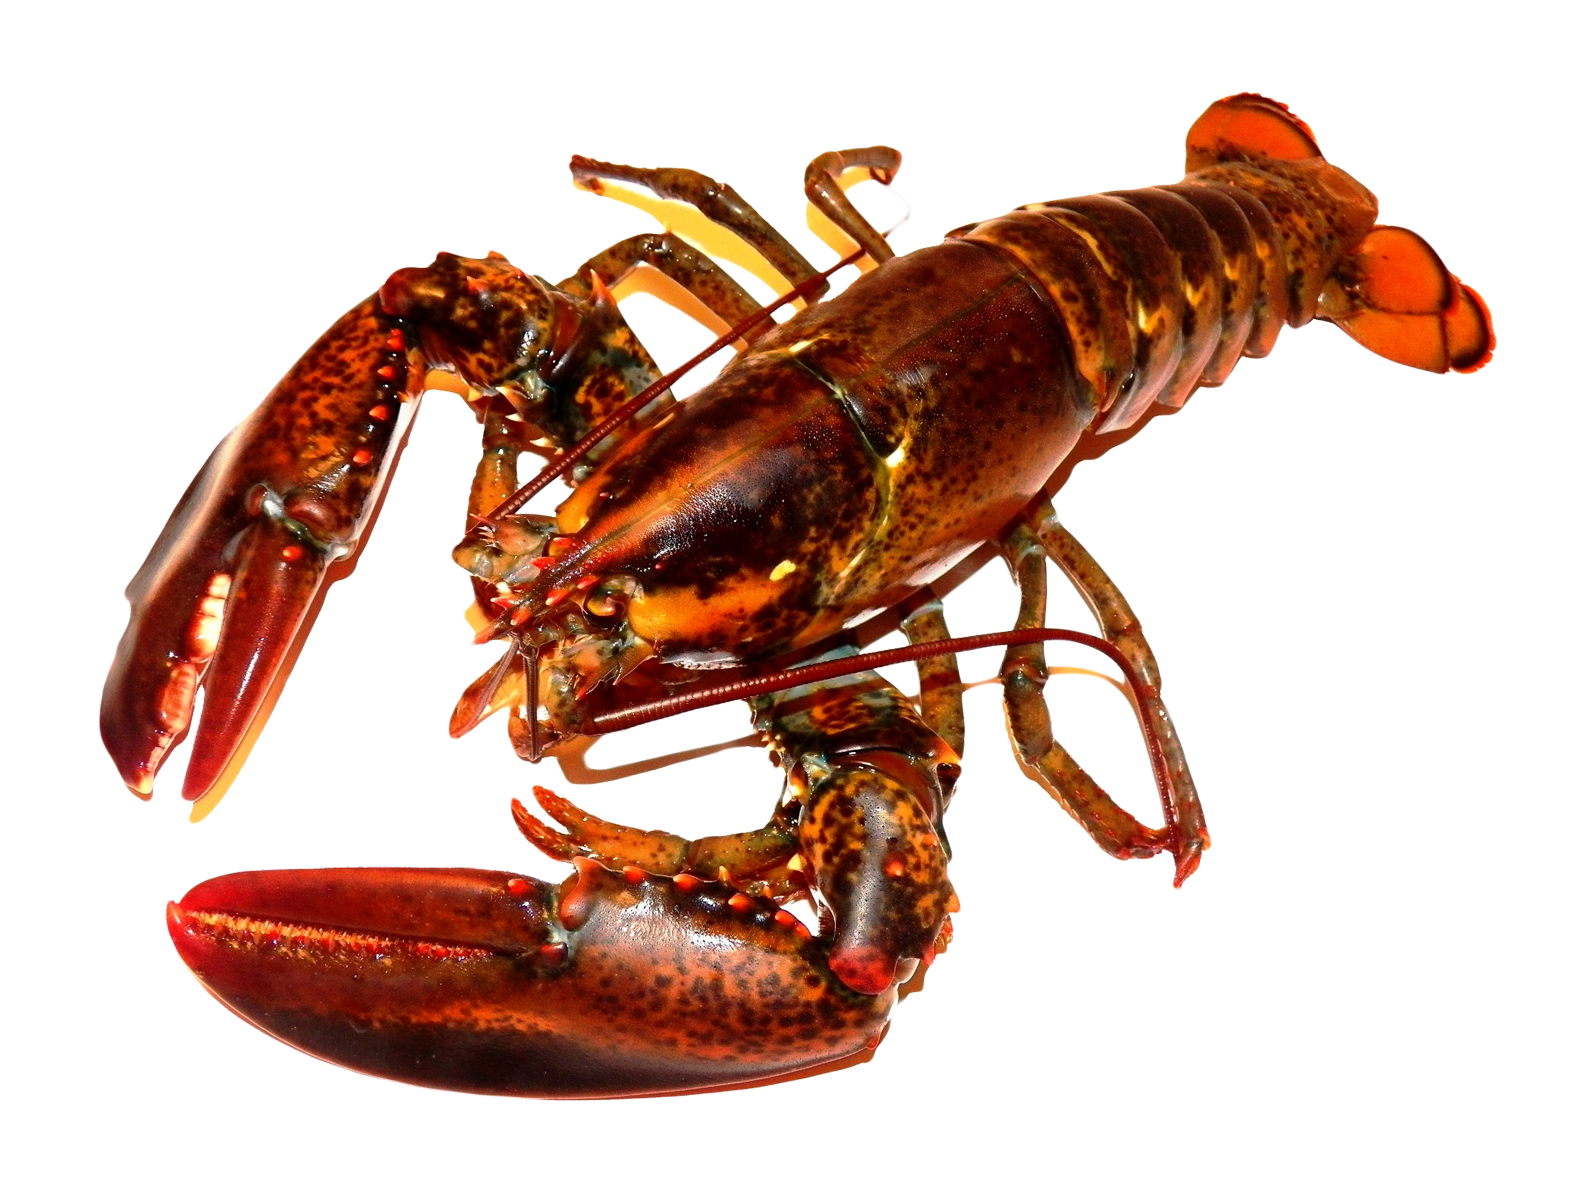 Lobster from West Coast Fish